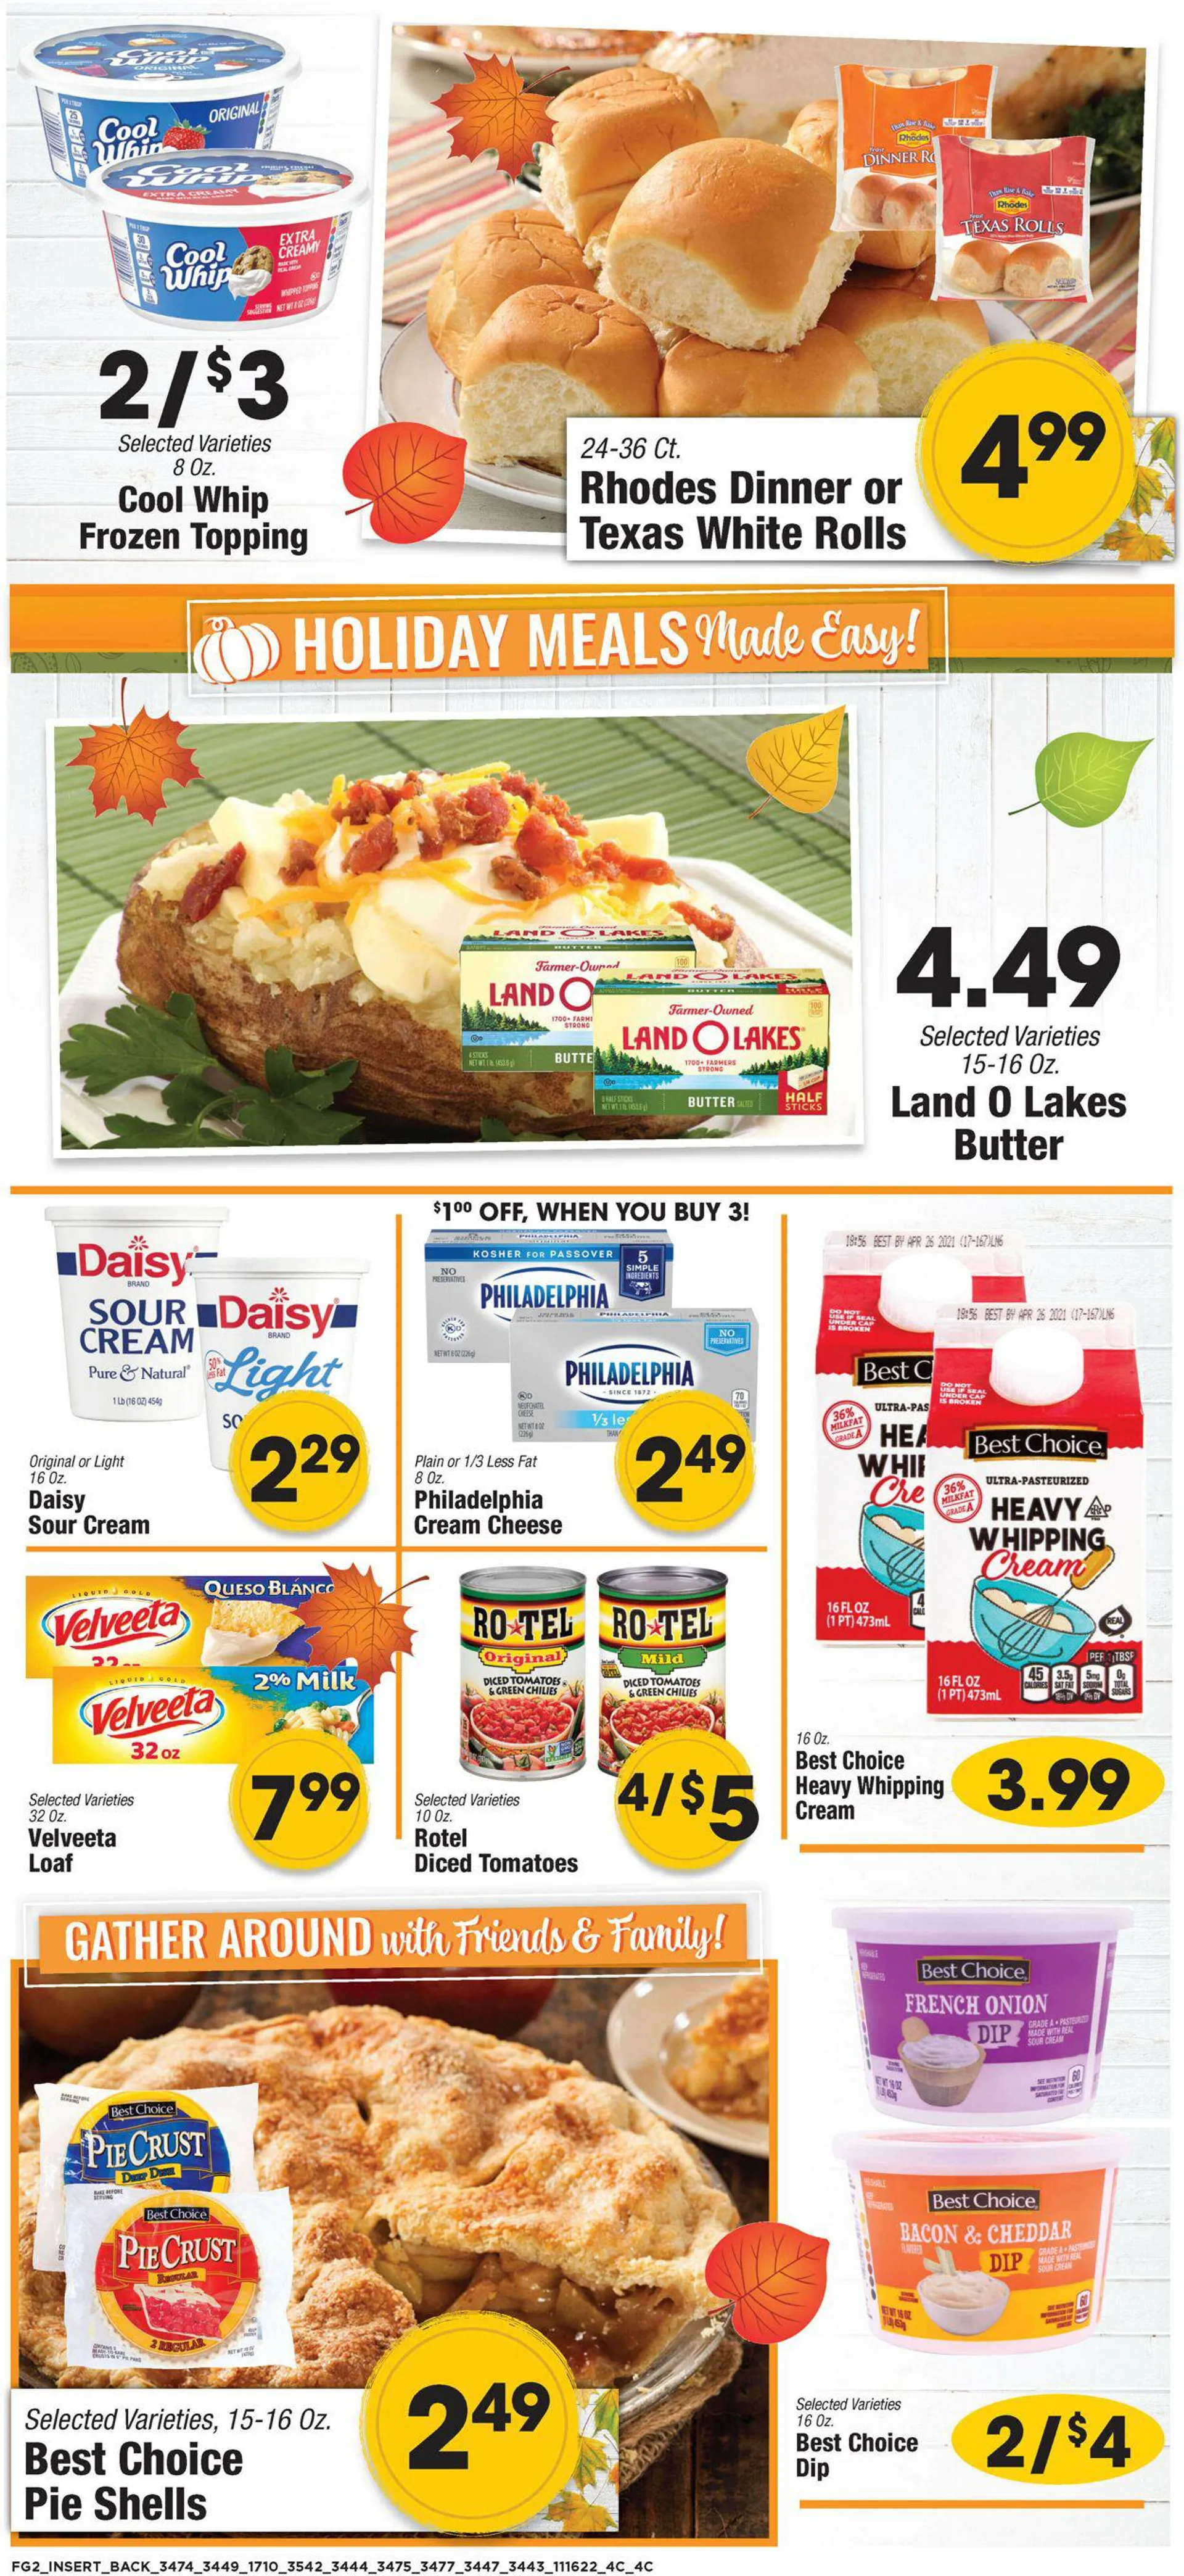 Edwards Food Giant Current weekly ad - 6